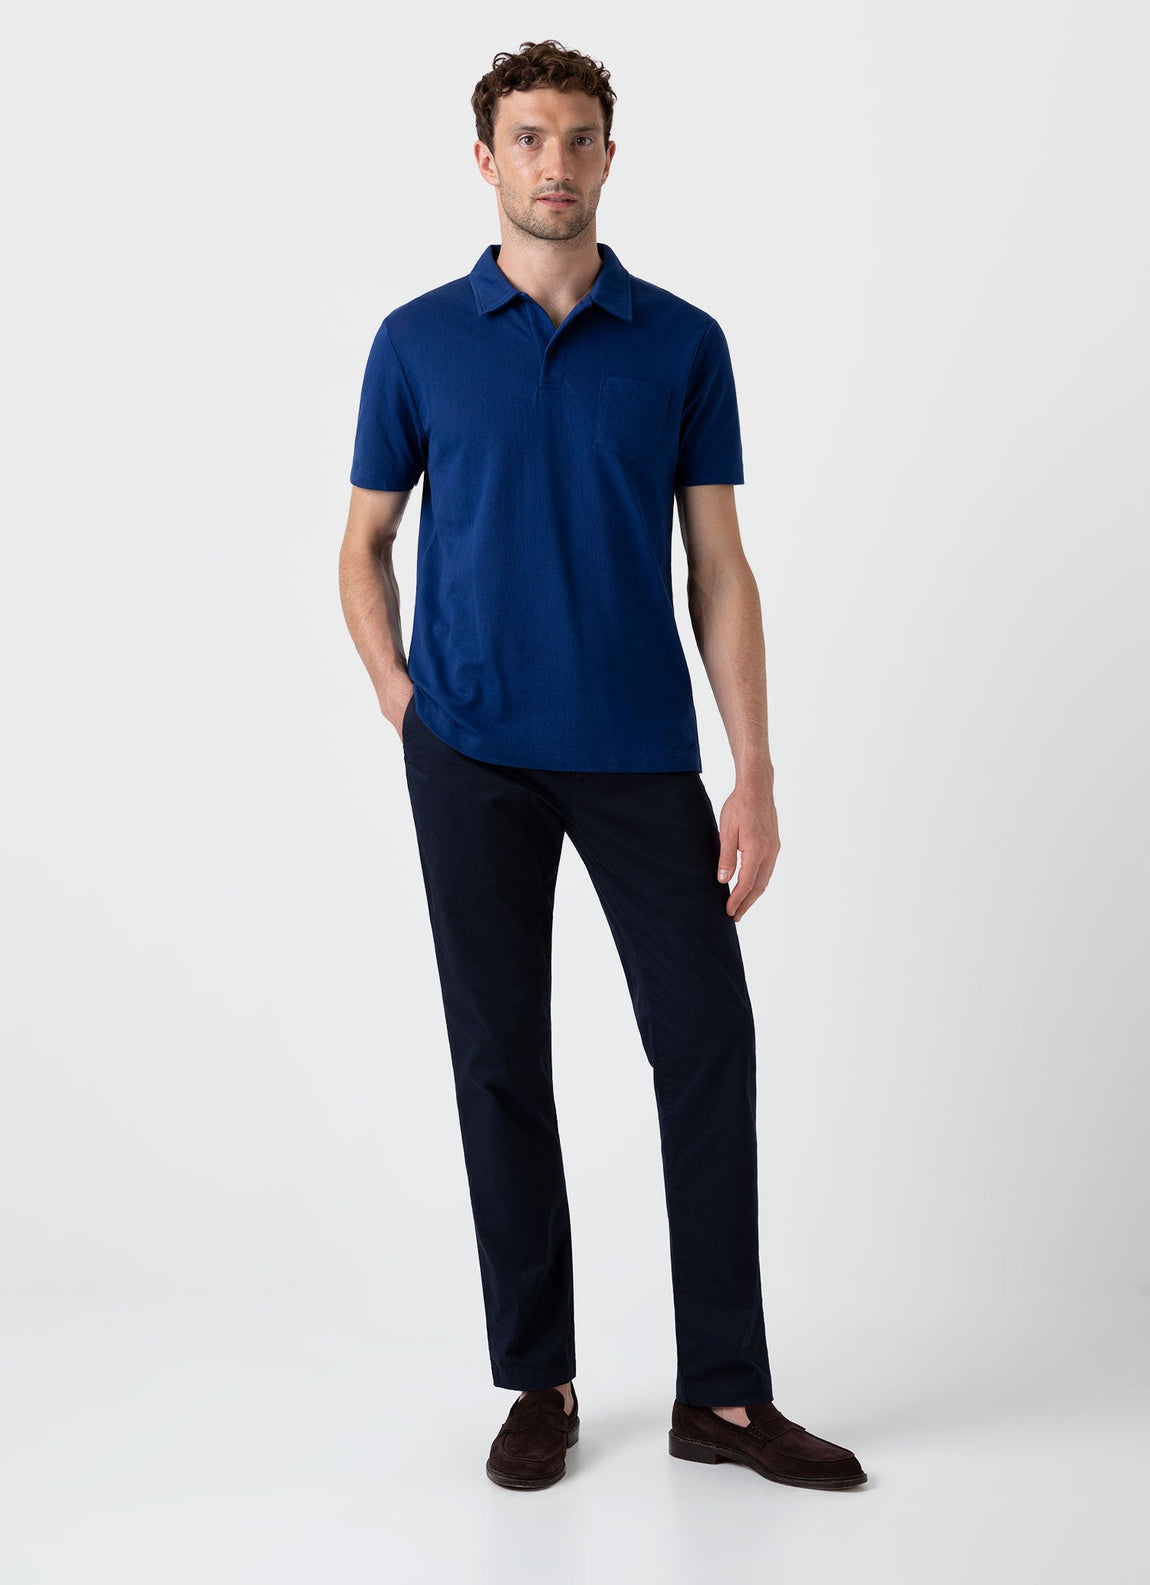 Men's Riviera Polo Shirt in Space Blue